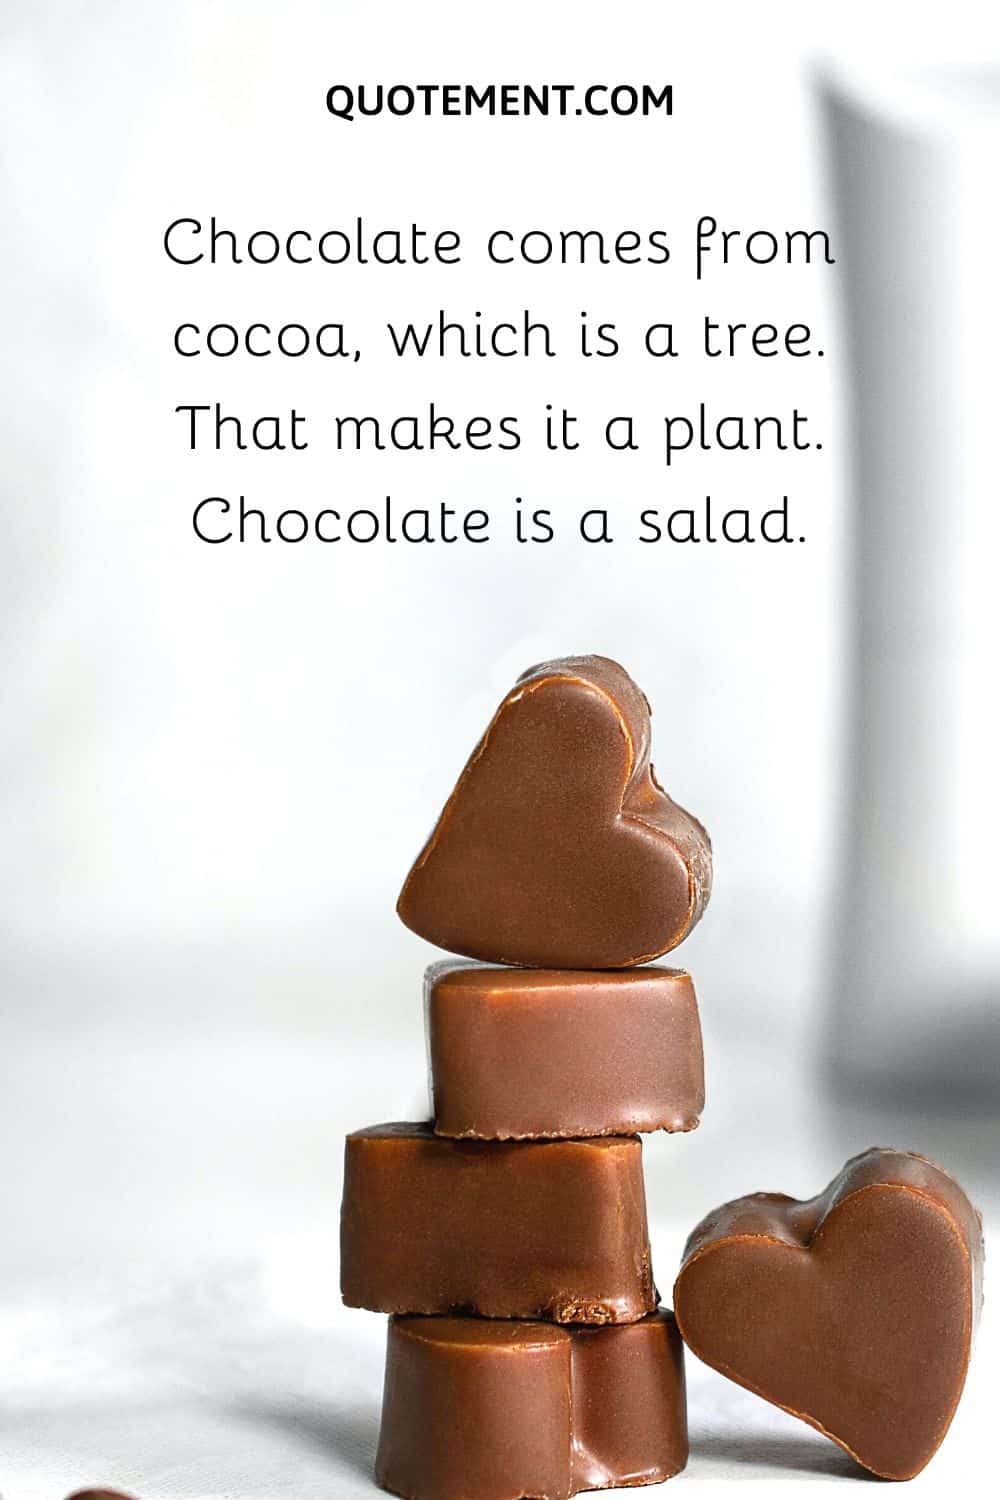 Chocolate comes from cocoa, which is a tree. That makes it a plant. Chocolate is a salad.